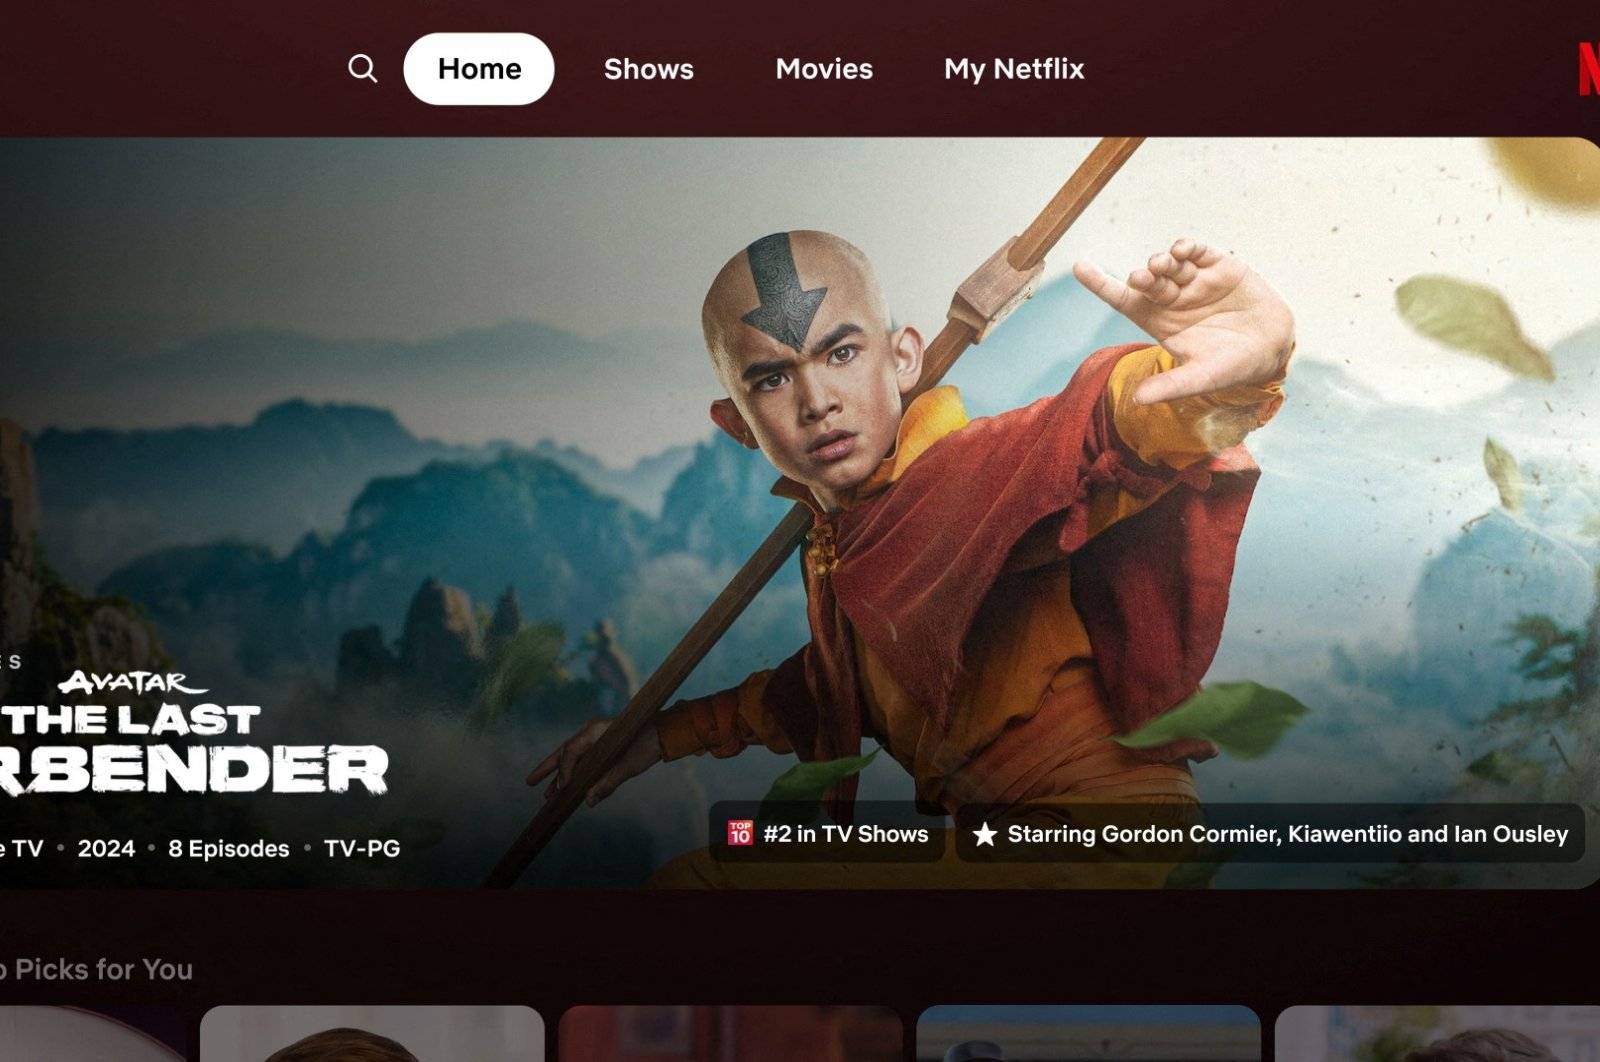 The design of the new homepage for the Netflix app, June 5, 2024. (Reuters Photo)